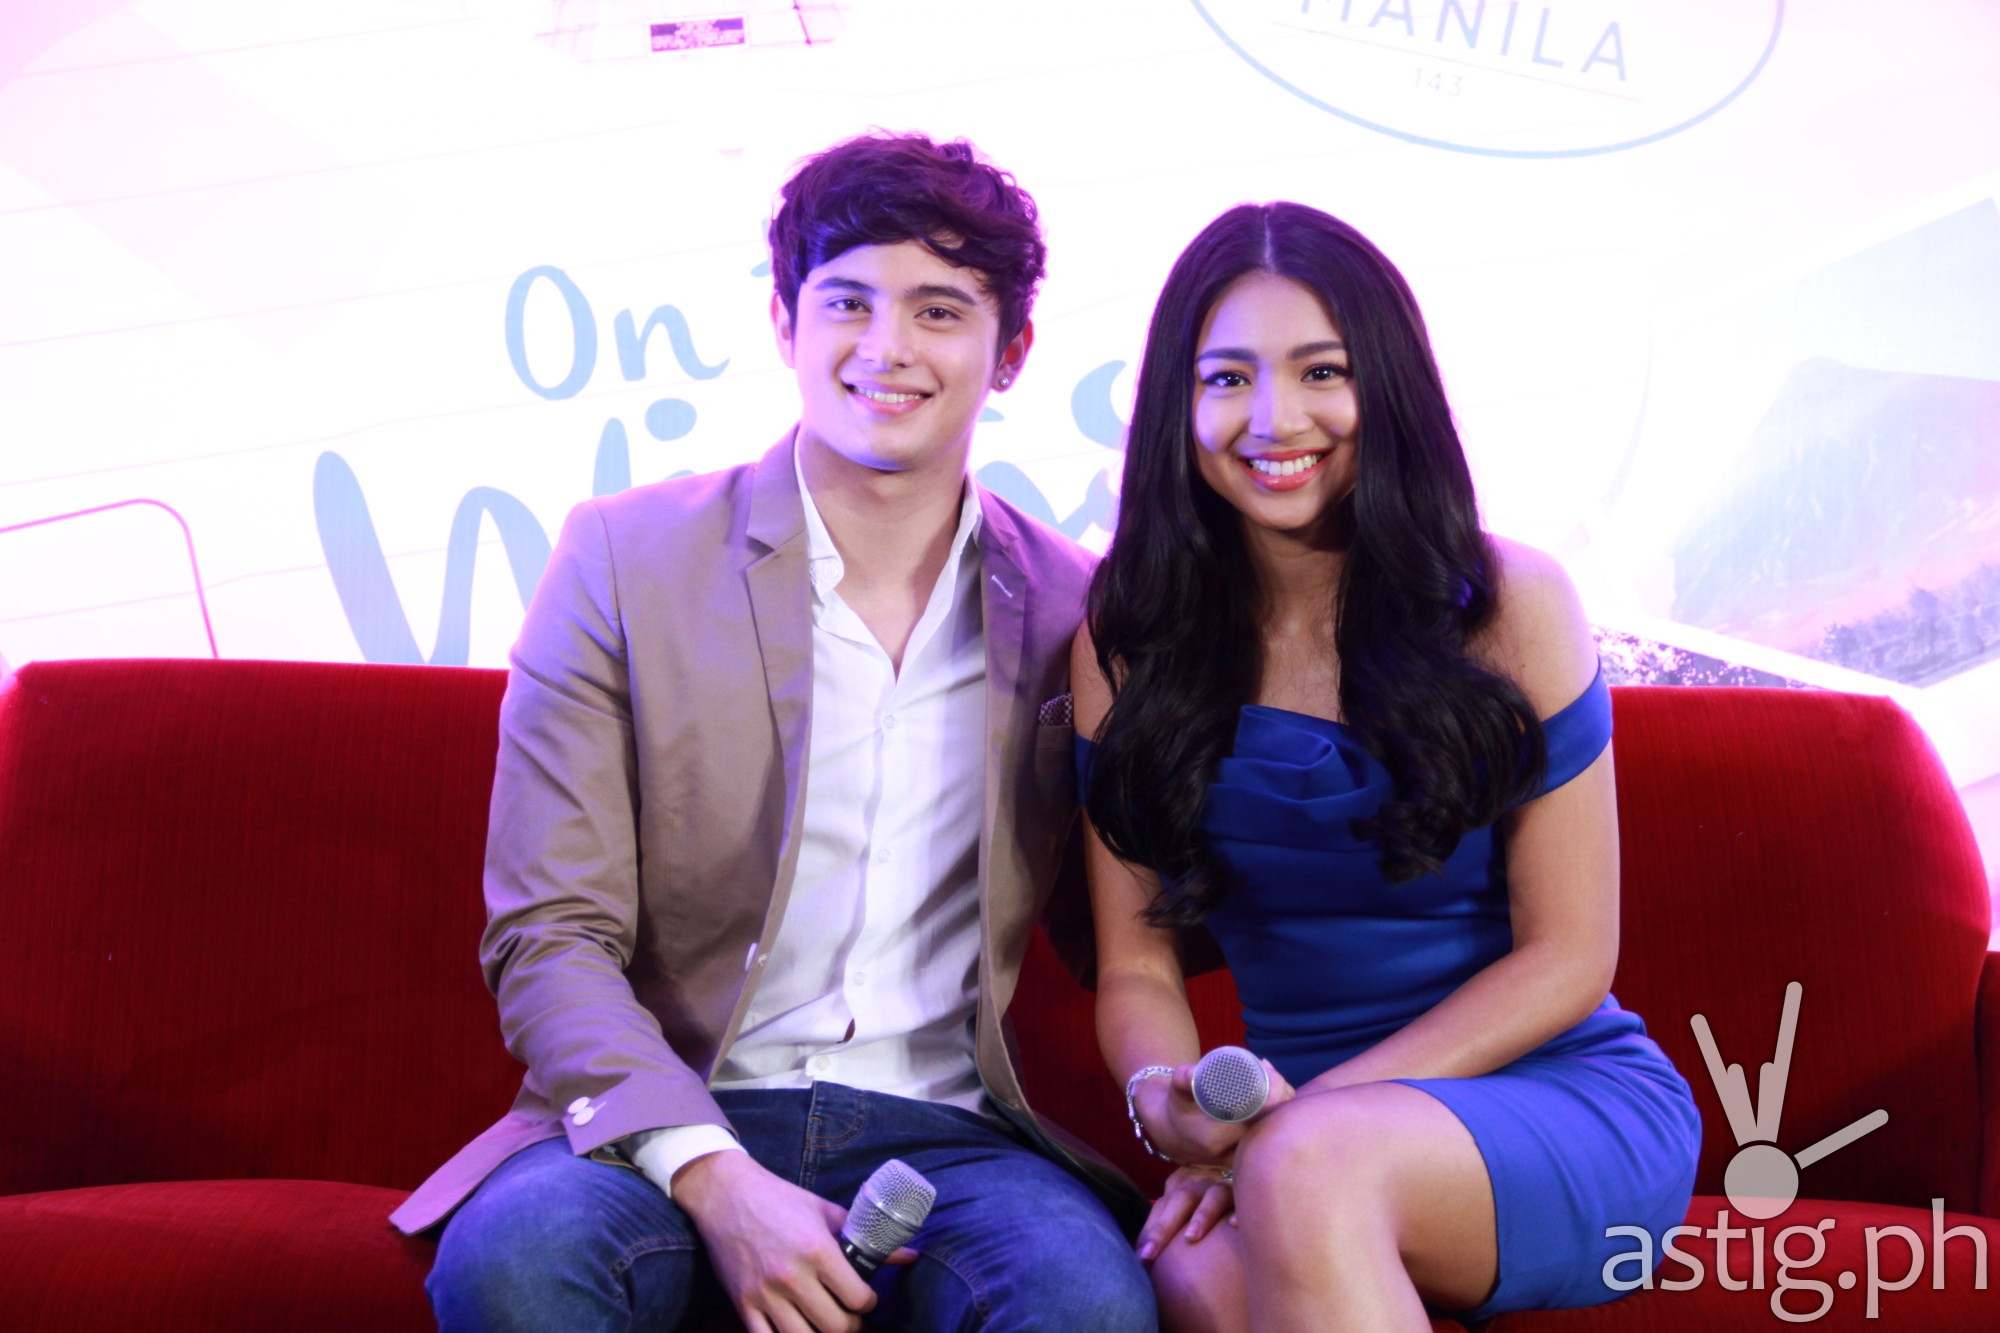 James Reid and Nadine Lustre at the OTWOL Media Day